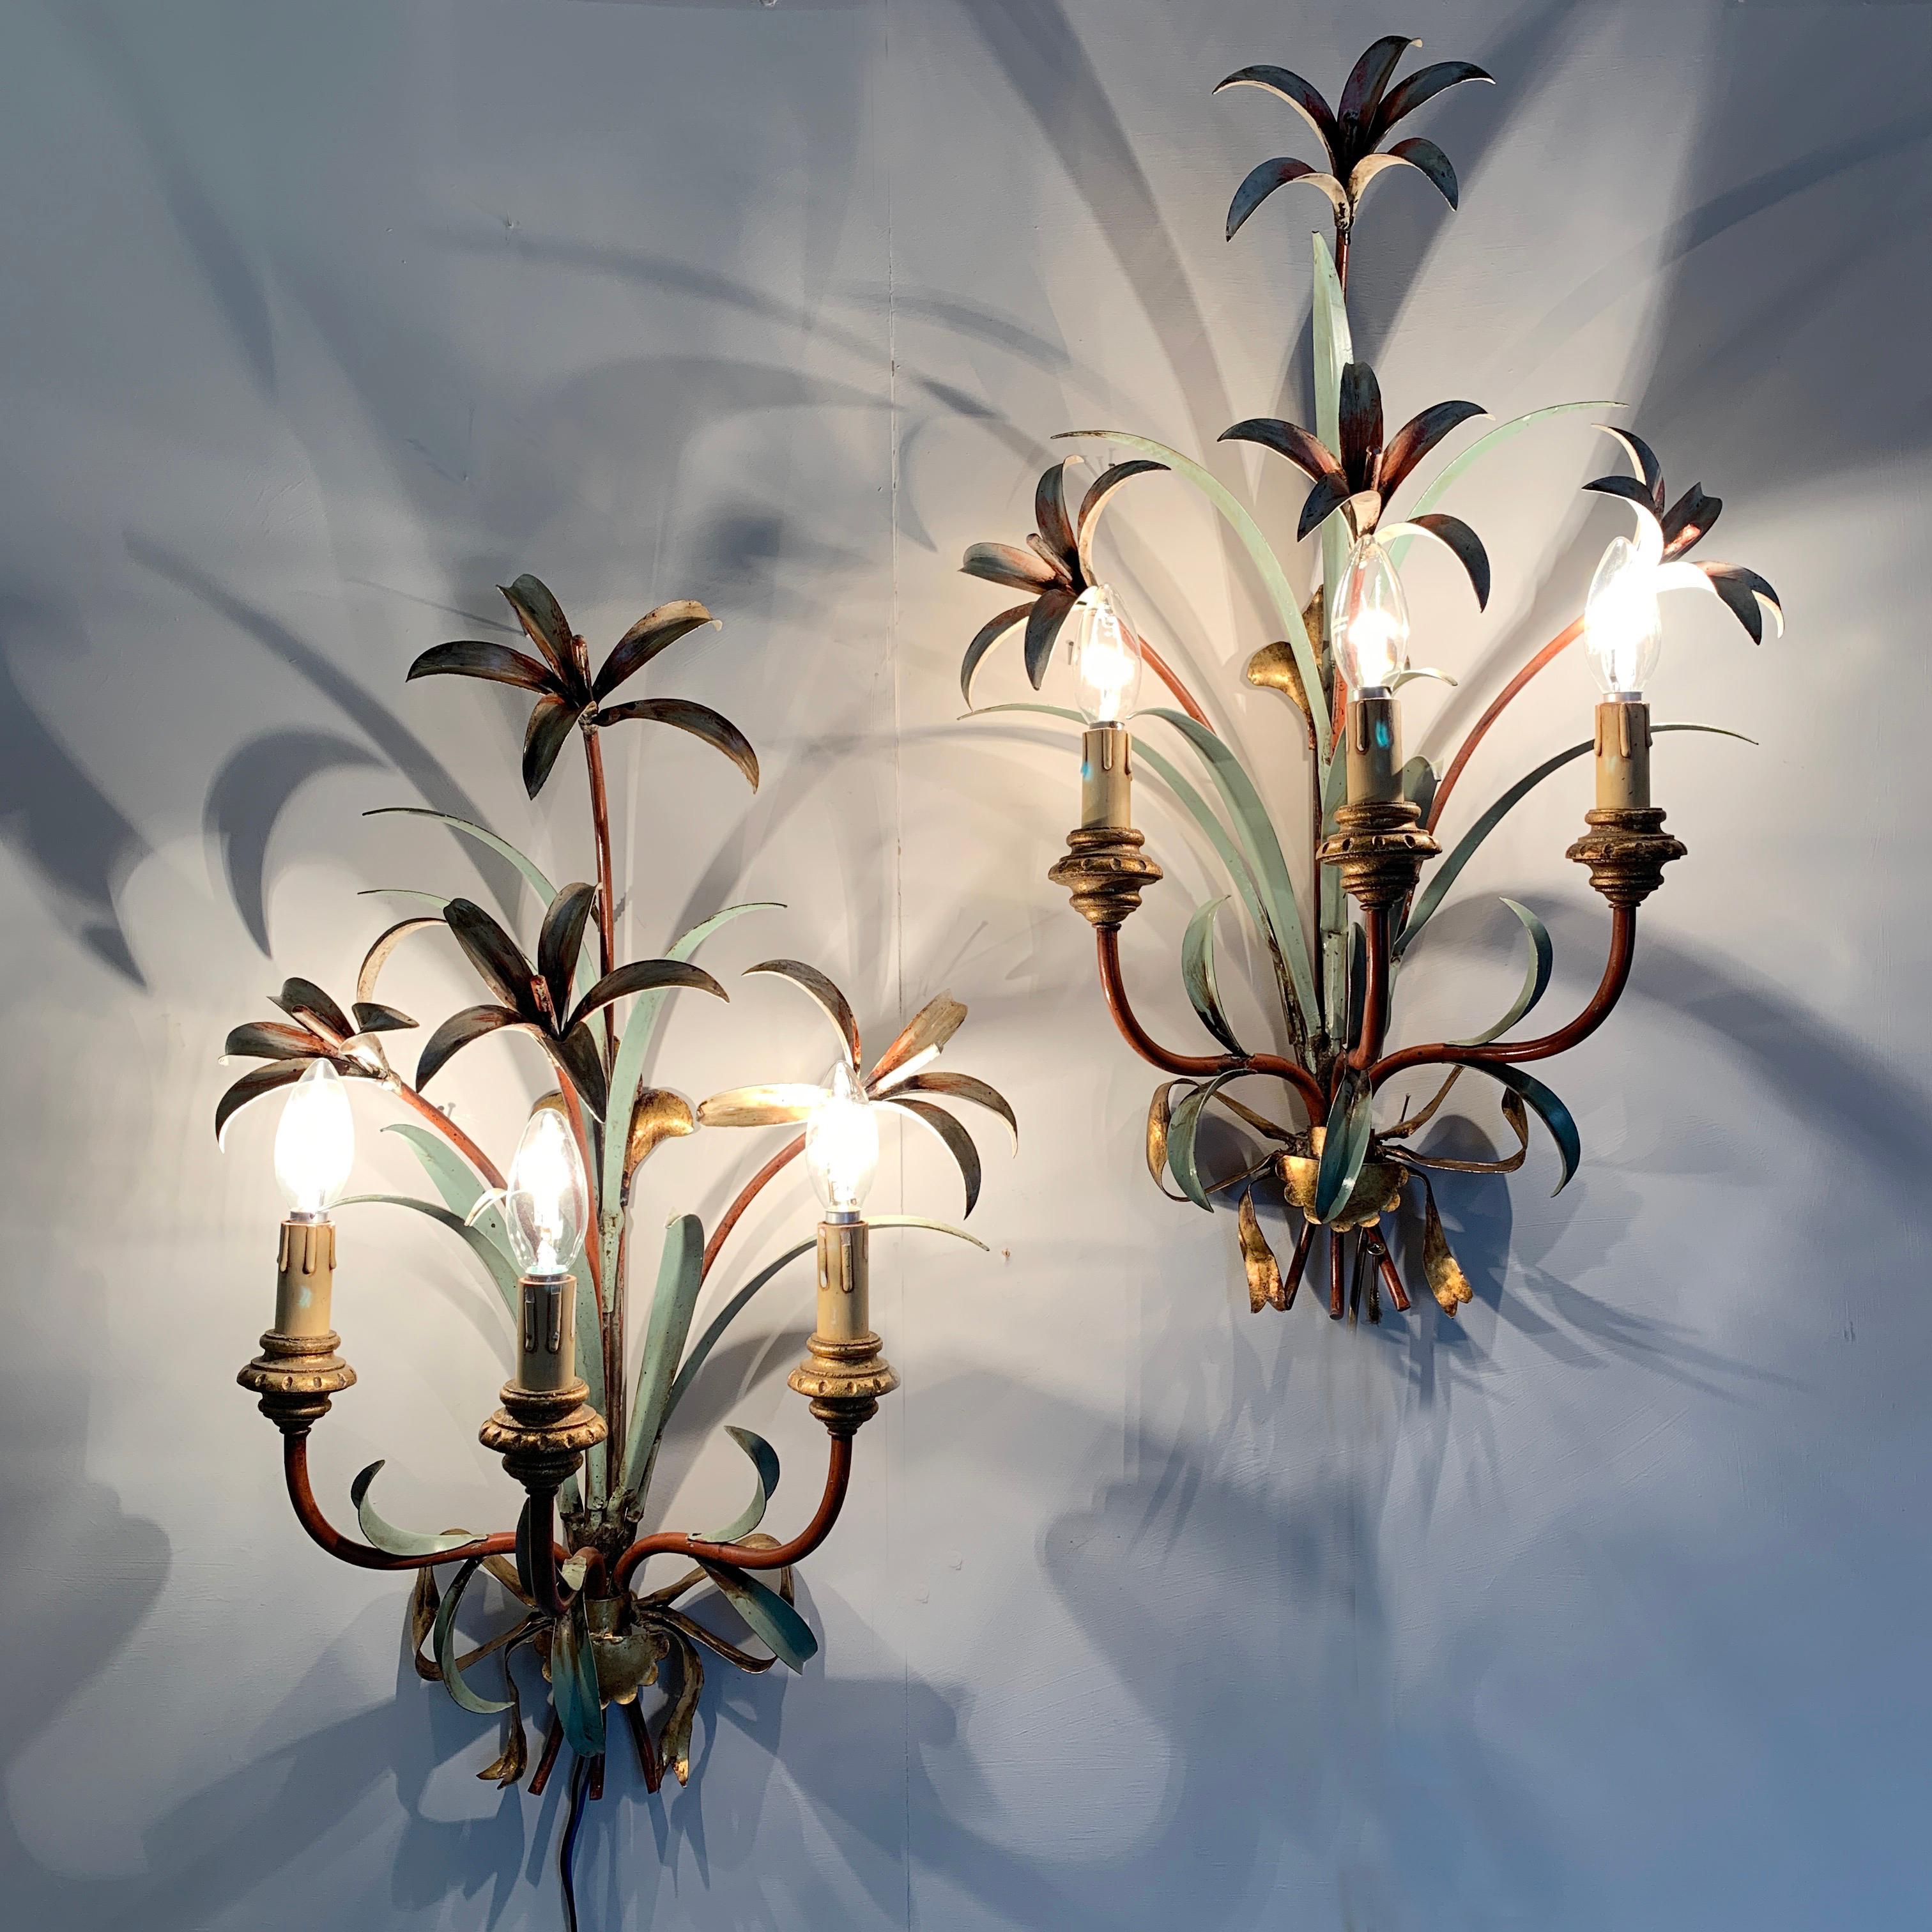 Midcentury lily flower tole wall lights
1950s, Italian
These large wall sconces made from hand formed metal leaves and flowers are stunning. There are 4 large lily heads and multiple lean green leaves surrounding them
Three curved red arms hold